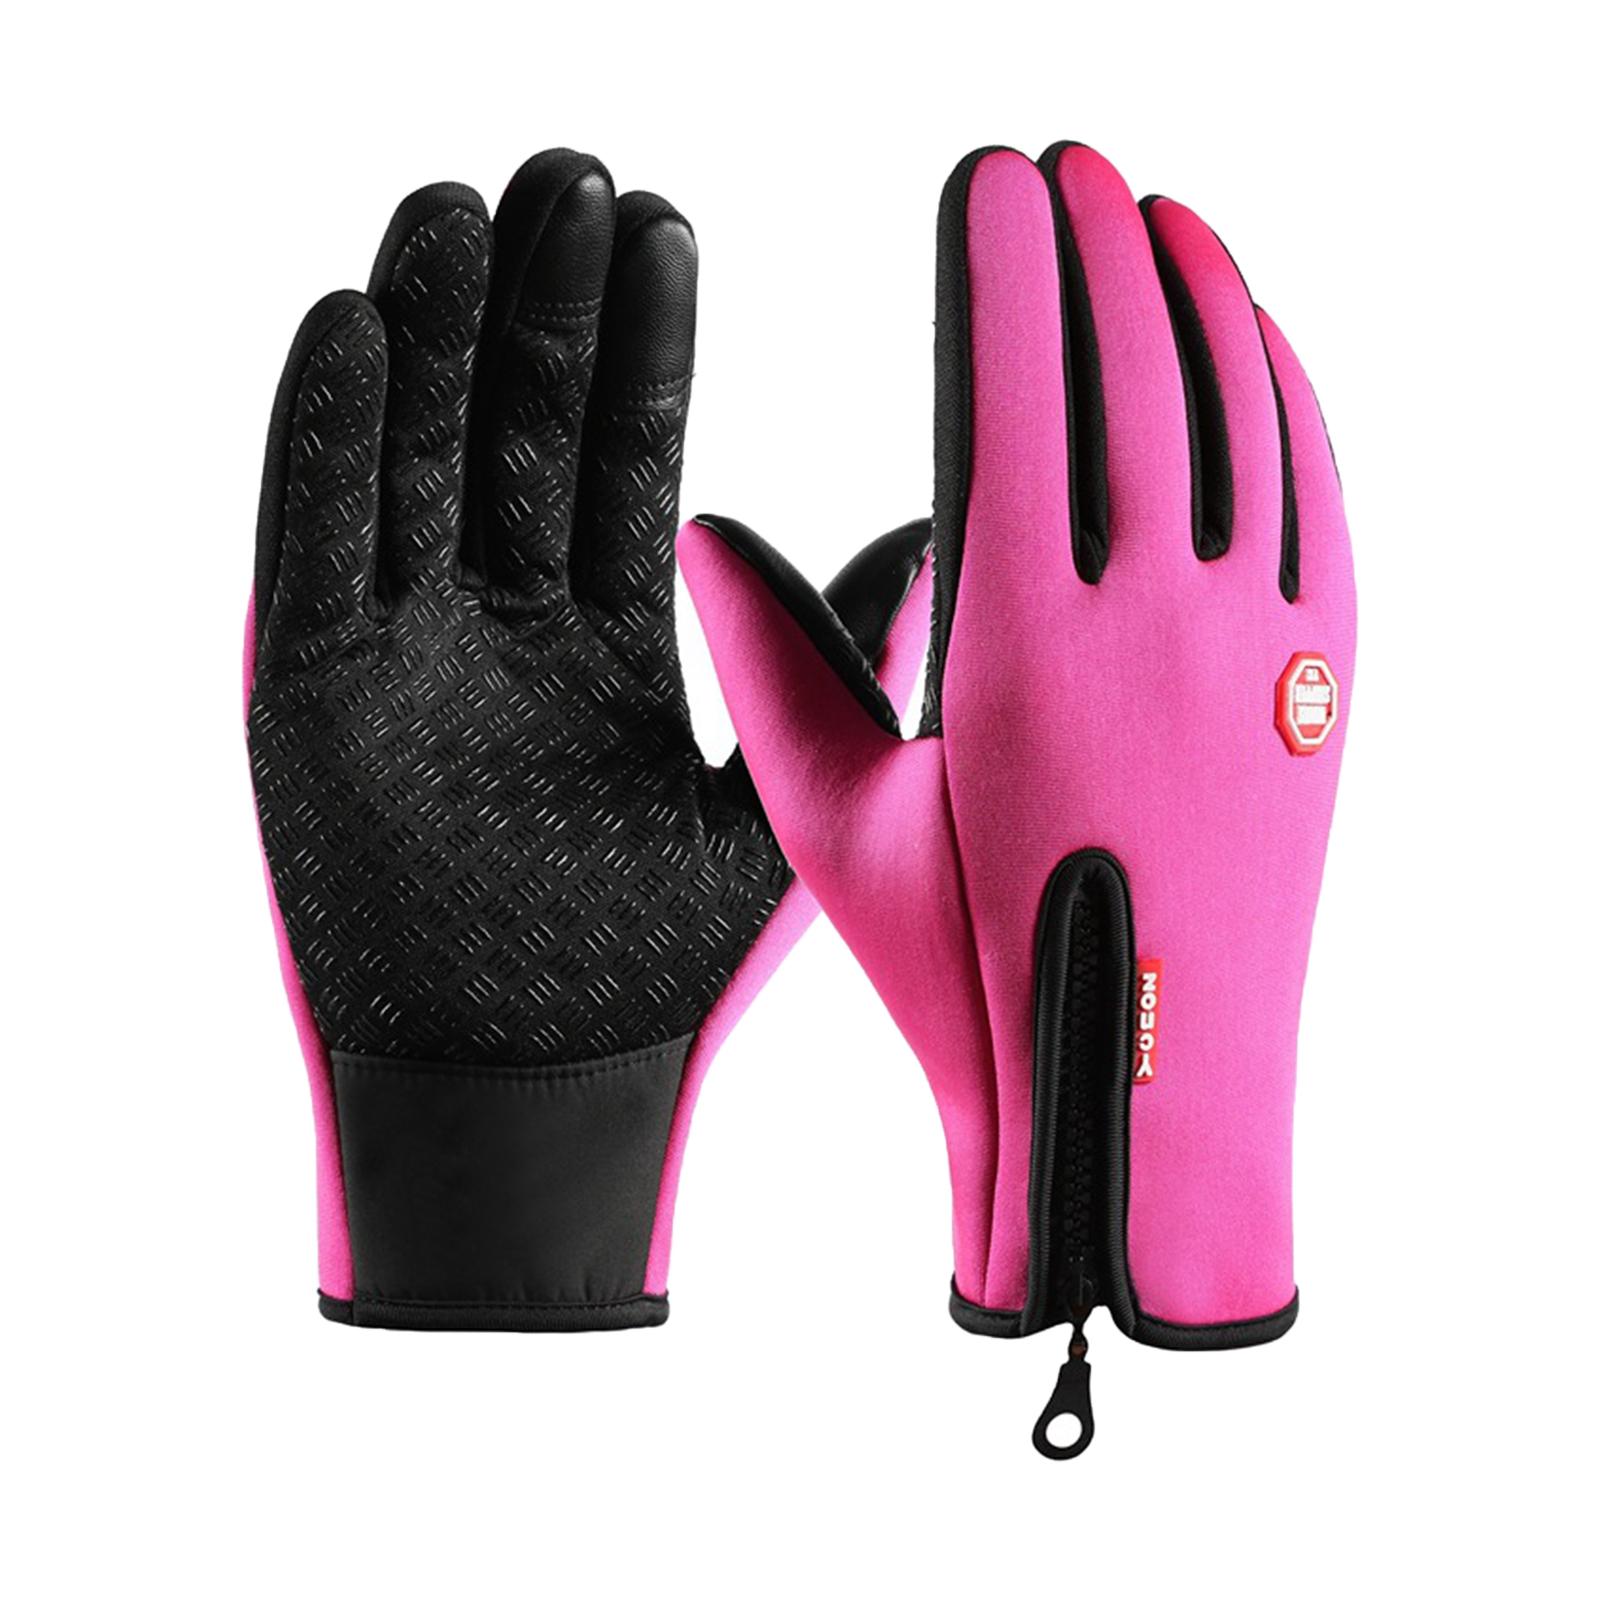 Winter Gloves Windproof Insulated for Motorcycle Cycling Adults Unisex M Pink